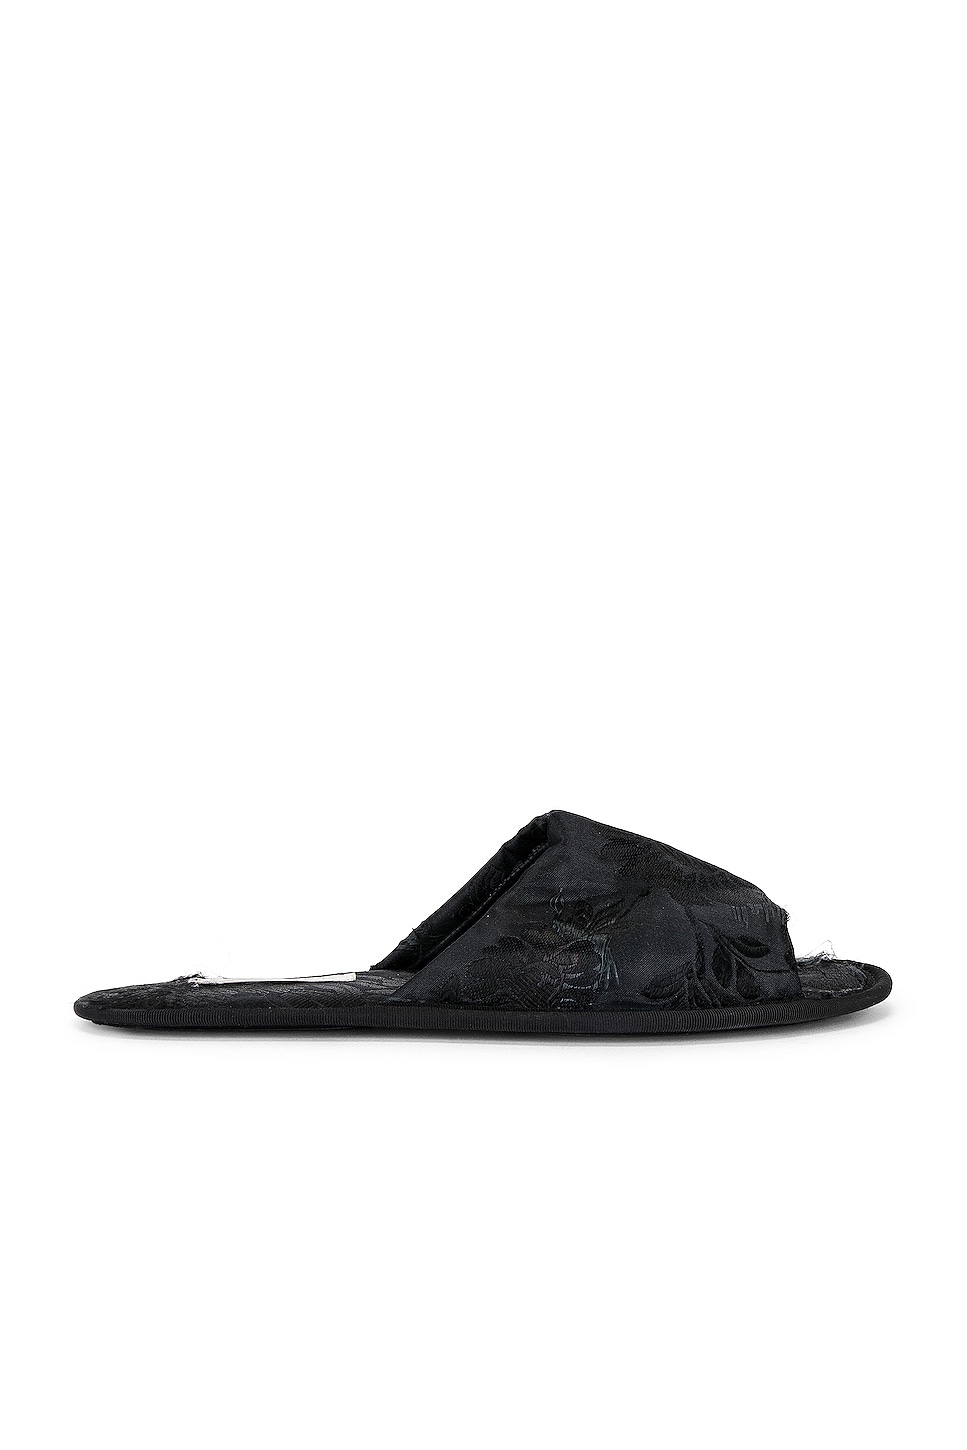 Image 1 of The Row Frances Open Toe Slipper in Black